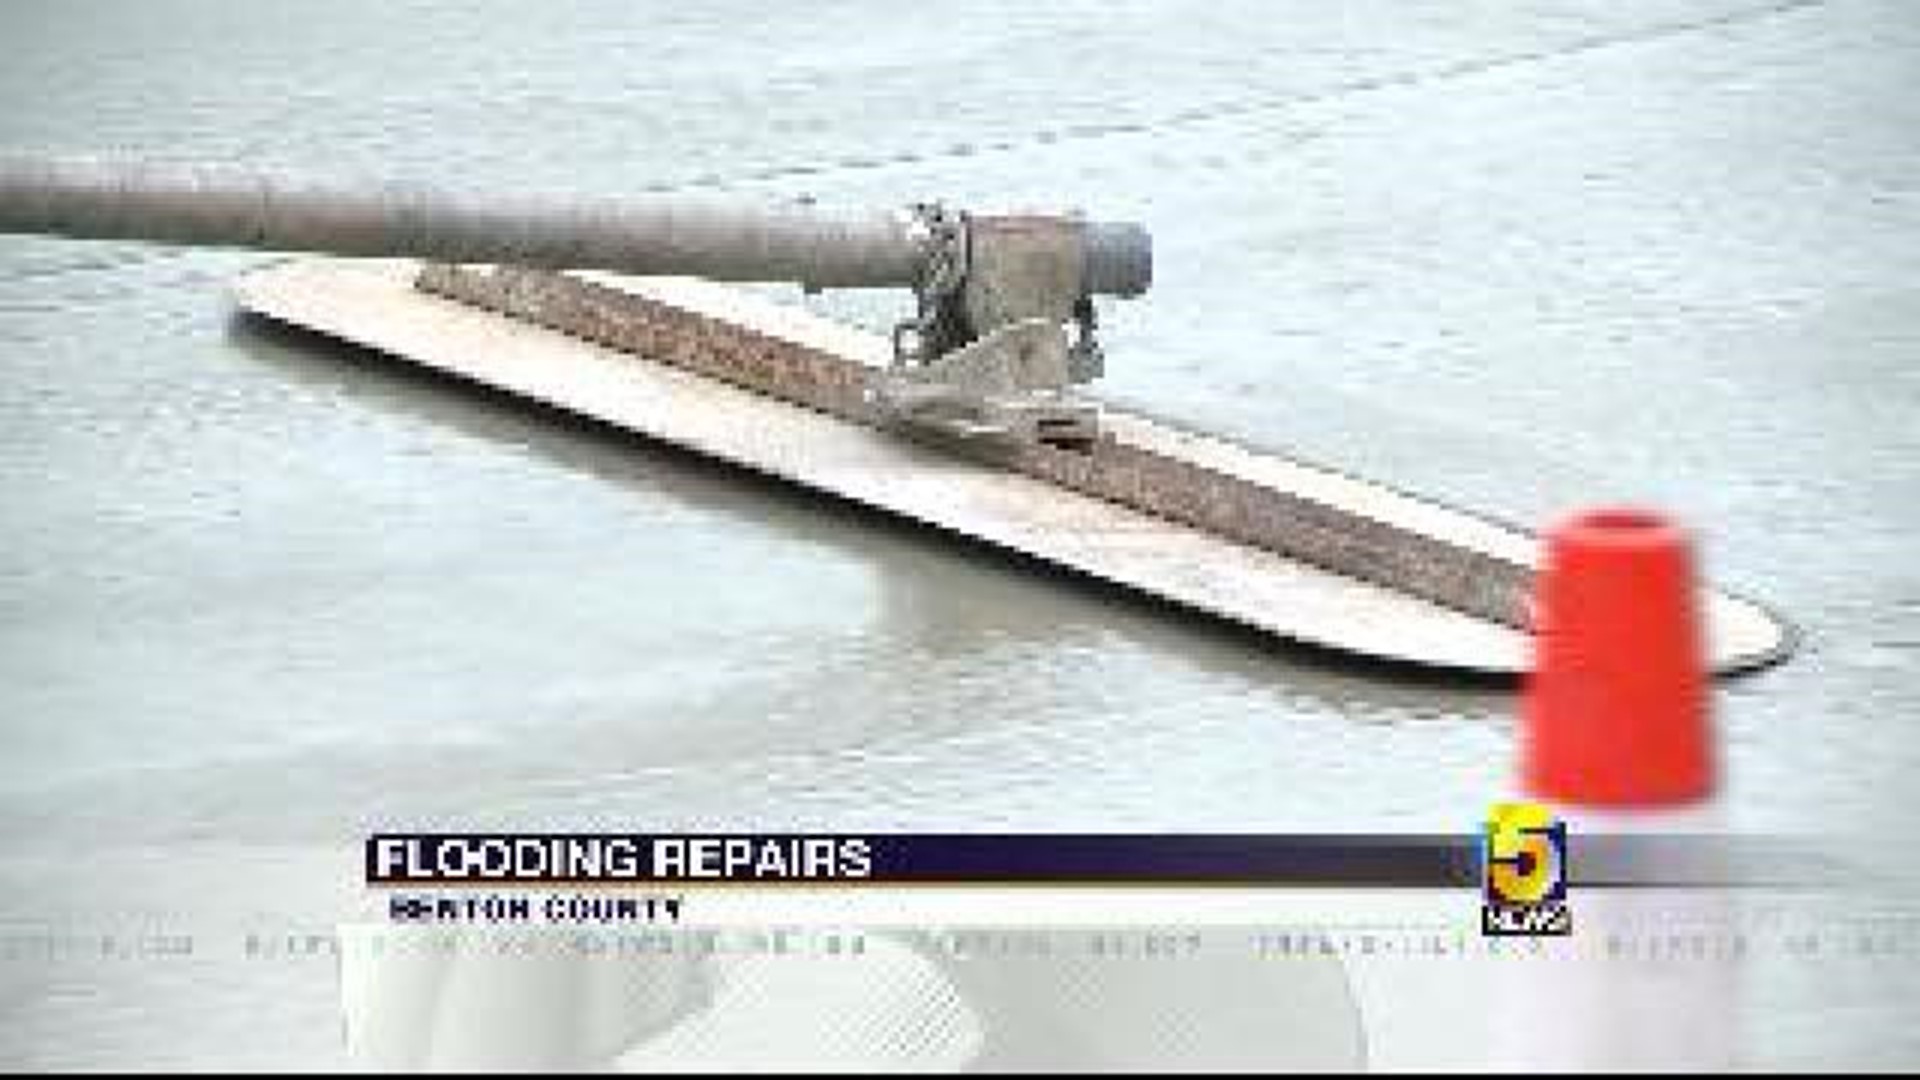 Benton County Flood Repairs To Be Complete By 2015